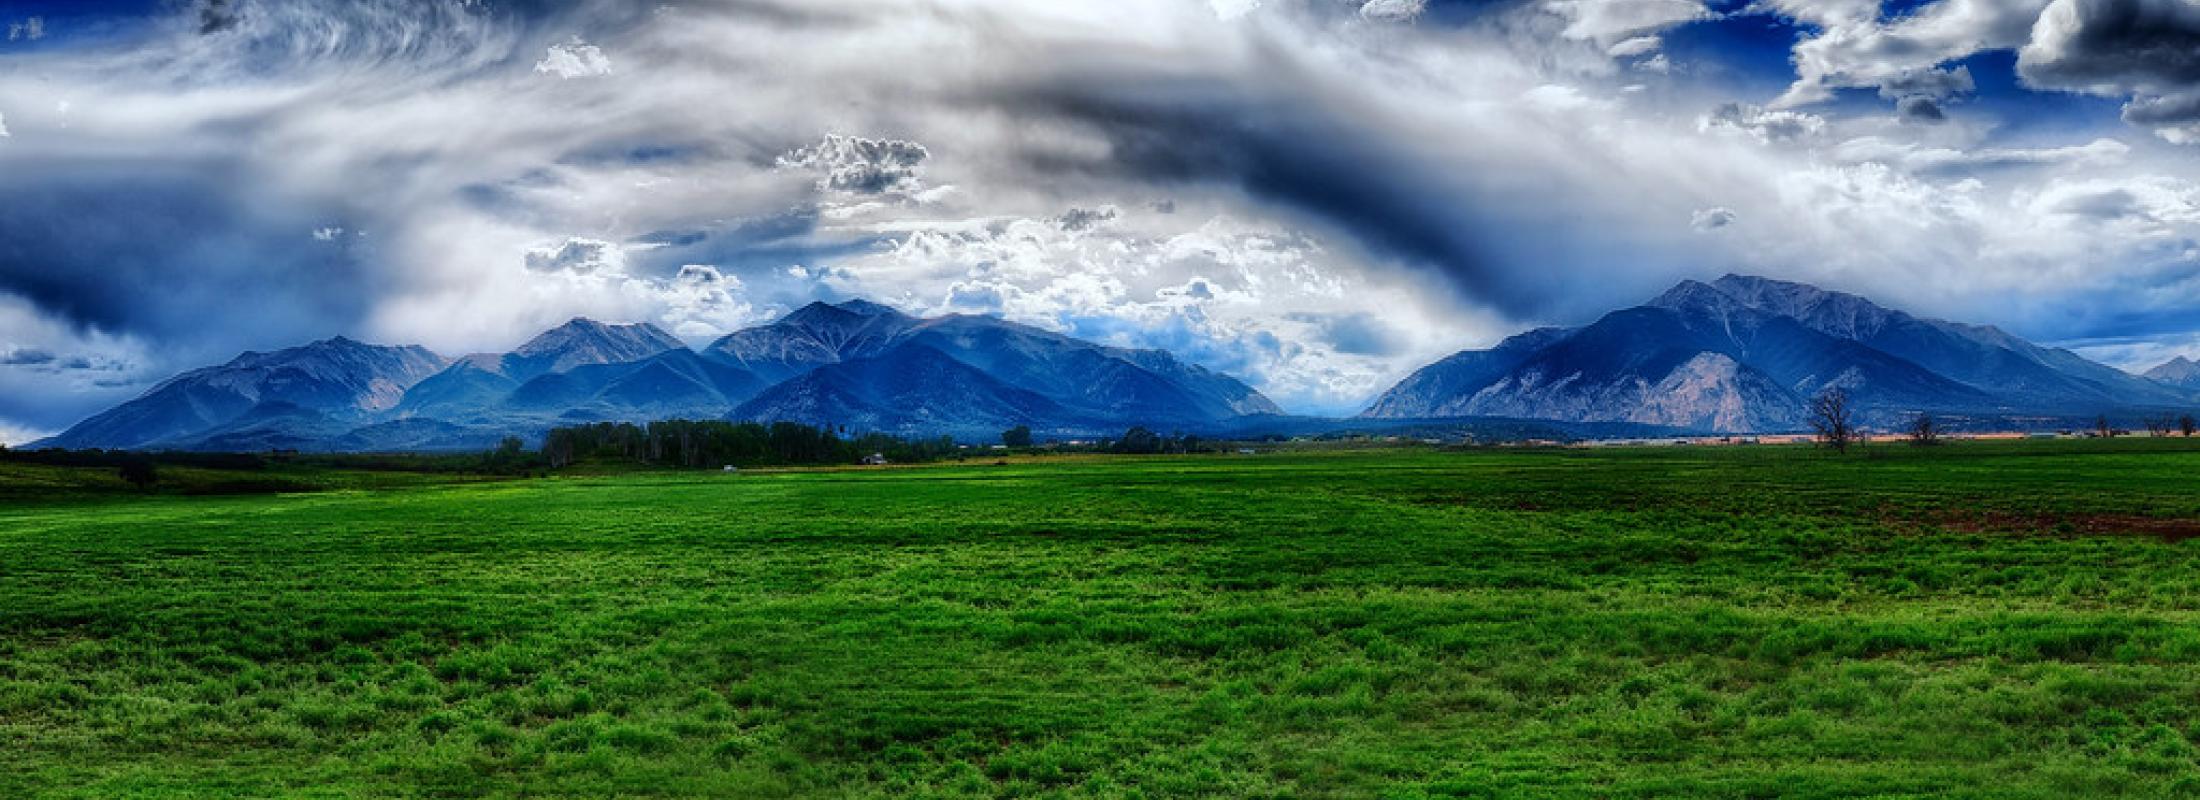 Photo of Colorado mountains by Max and Dee Bernt, Creative Commons license